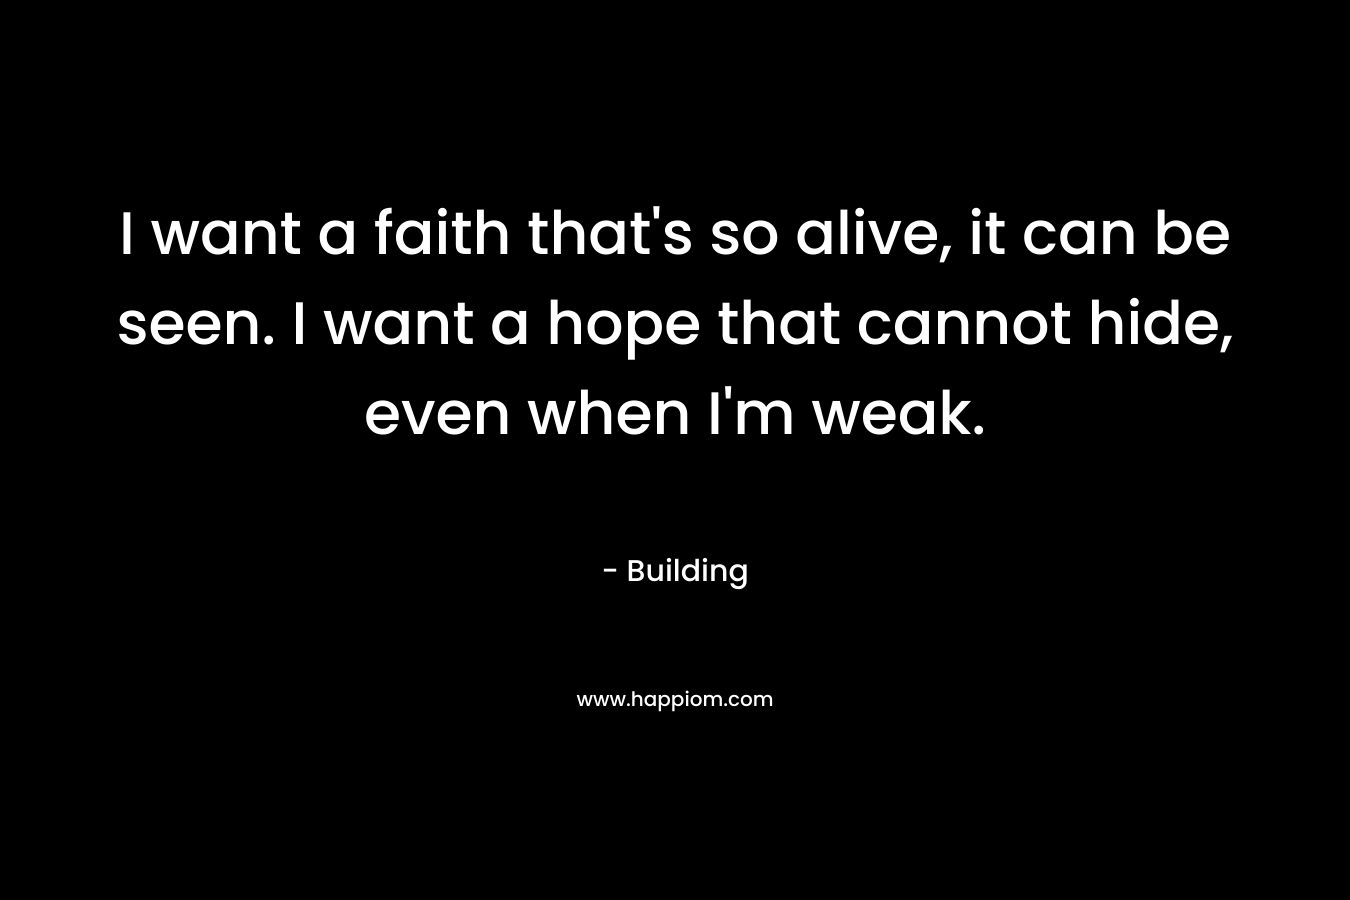 I want a faith that's so alive, it can be seen. I want a hope that cannot hide, even when I'm weak.